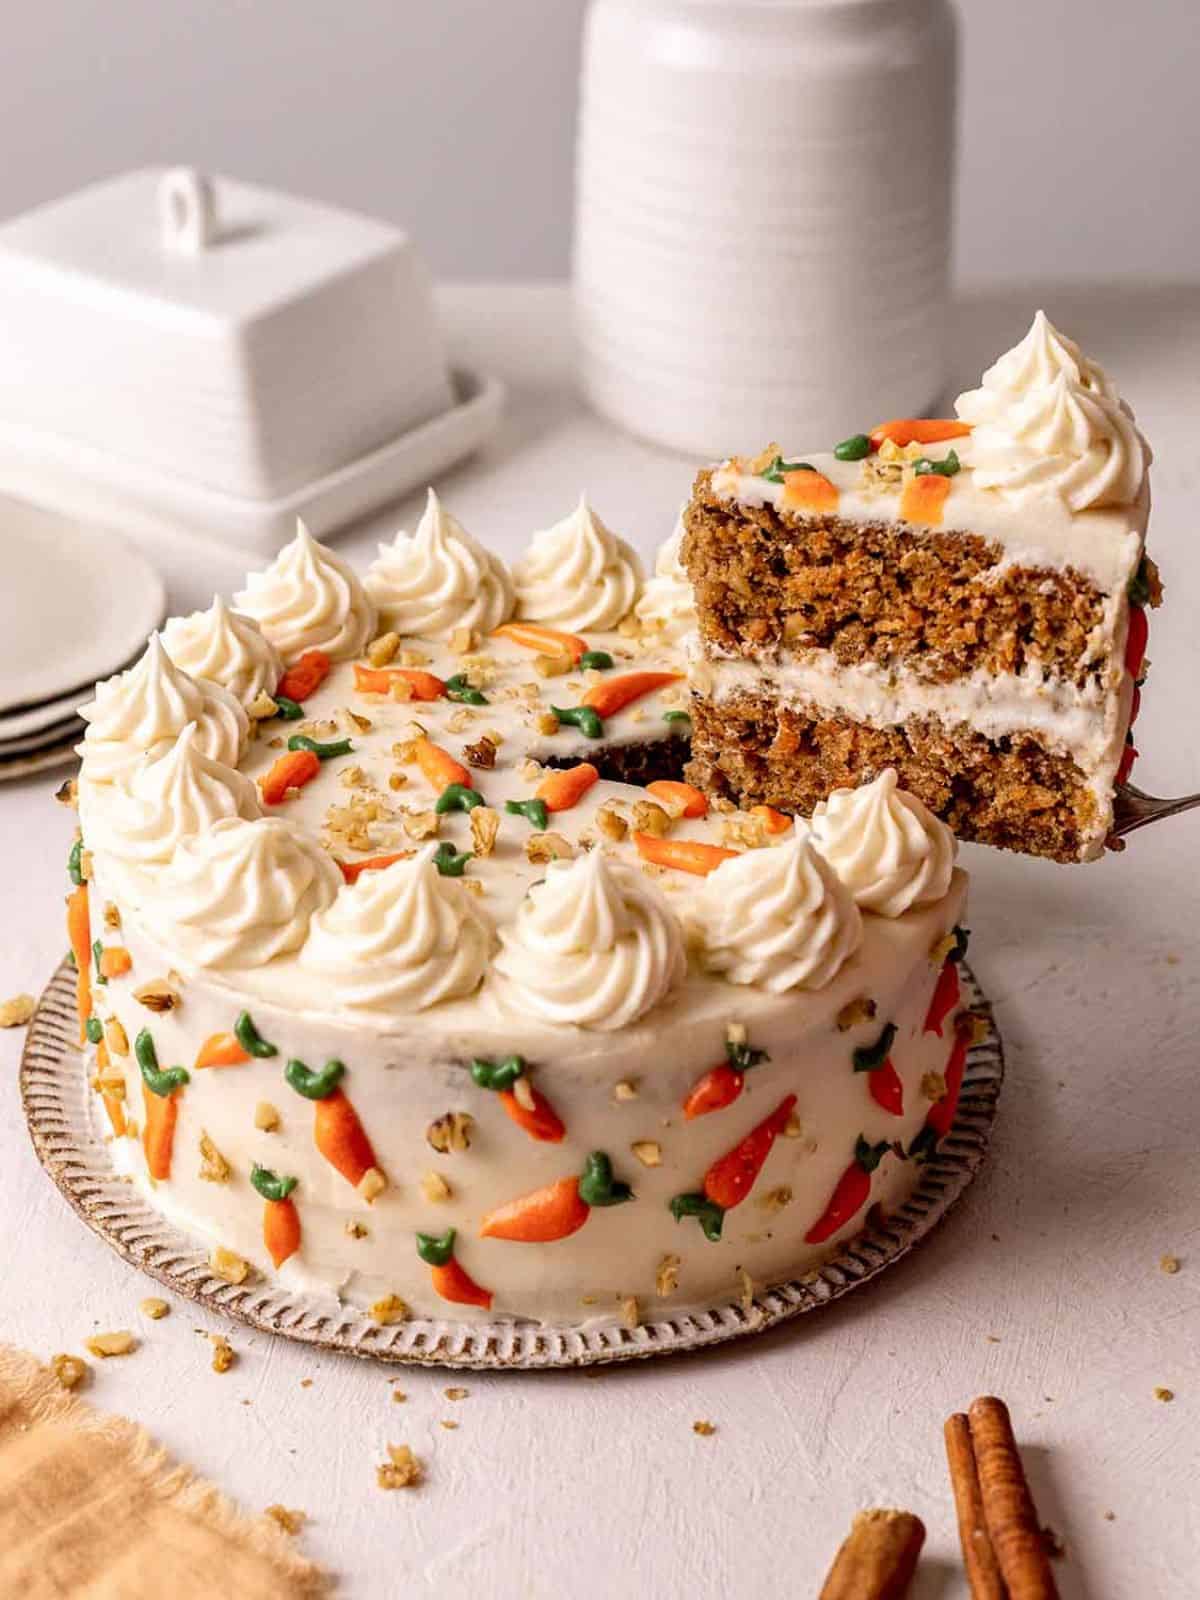 moist vegan carrot cake topped with creamy frosting, garnished with carrots and nuts.